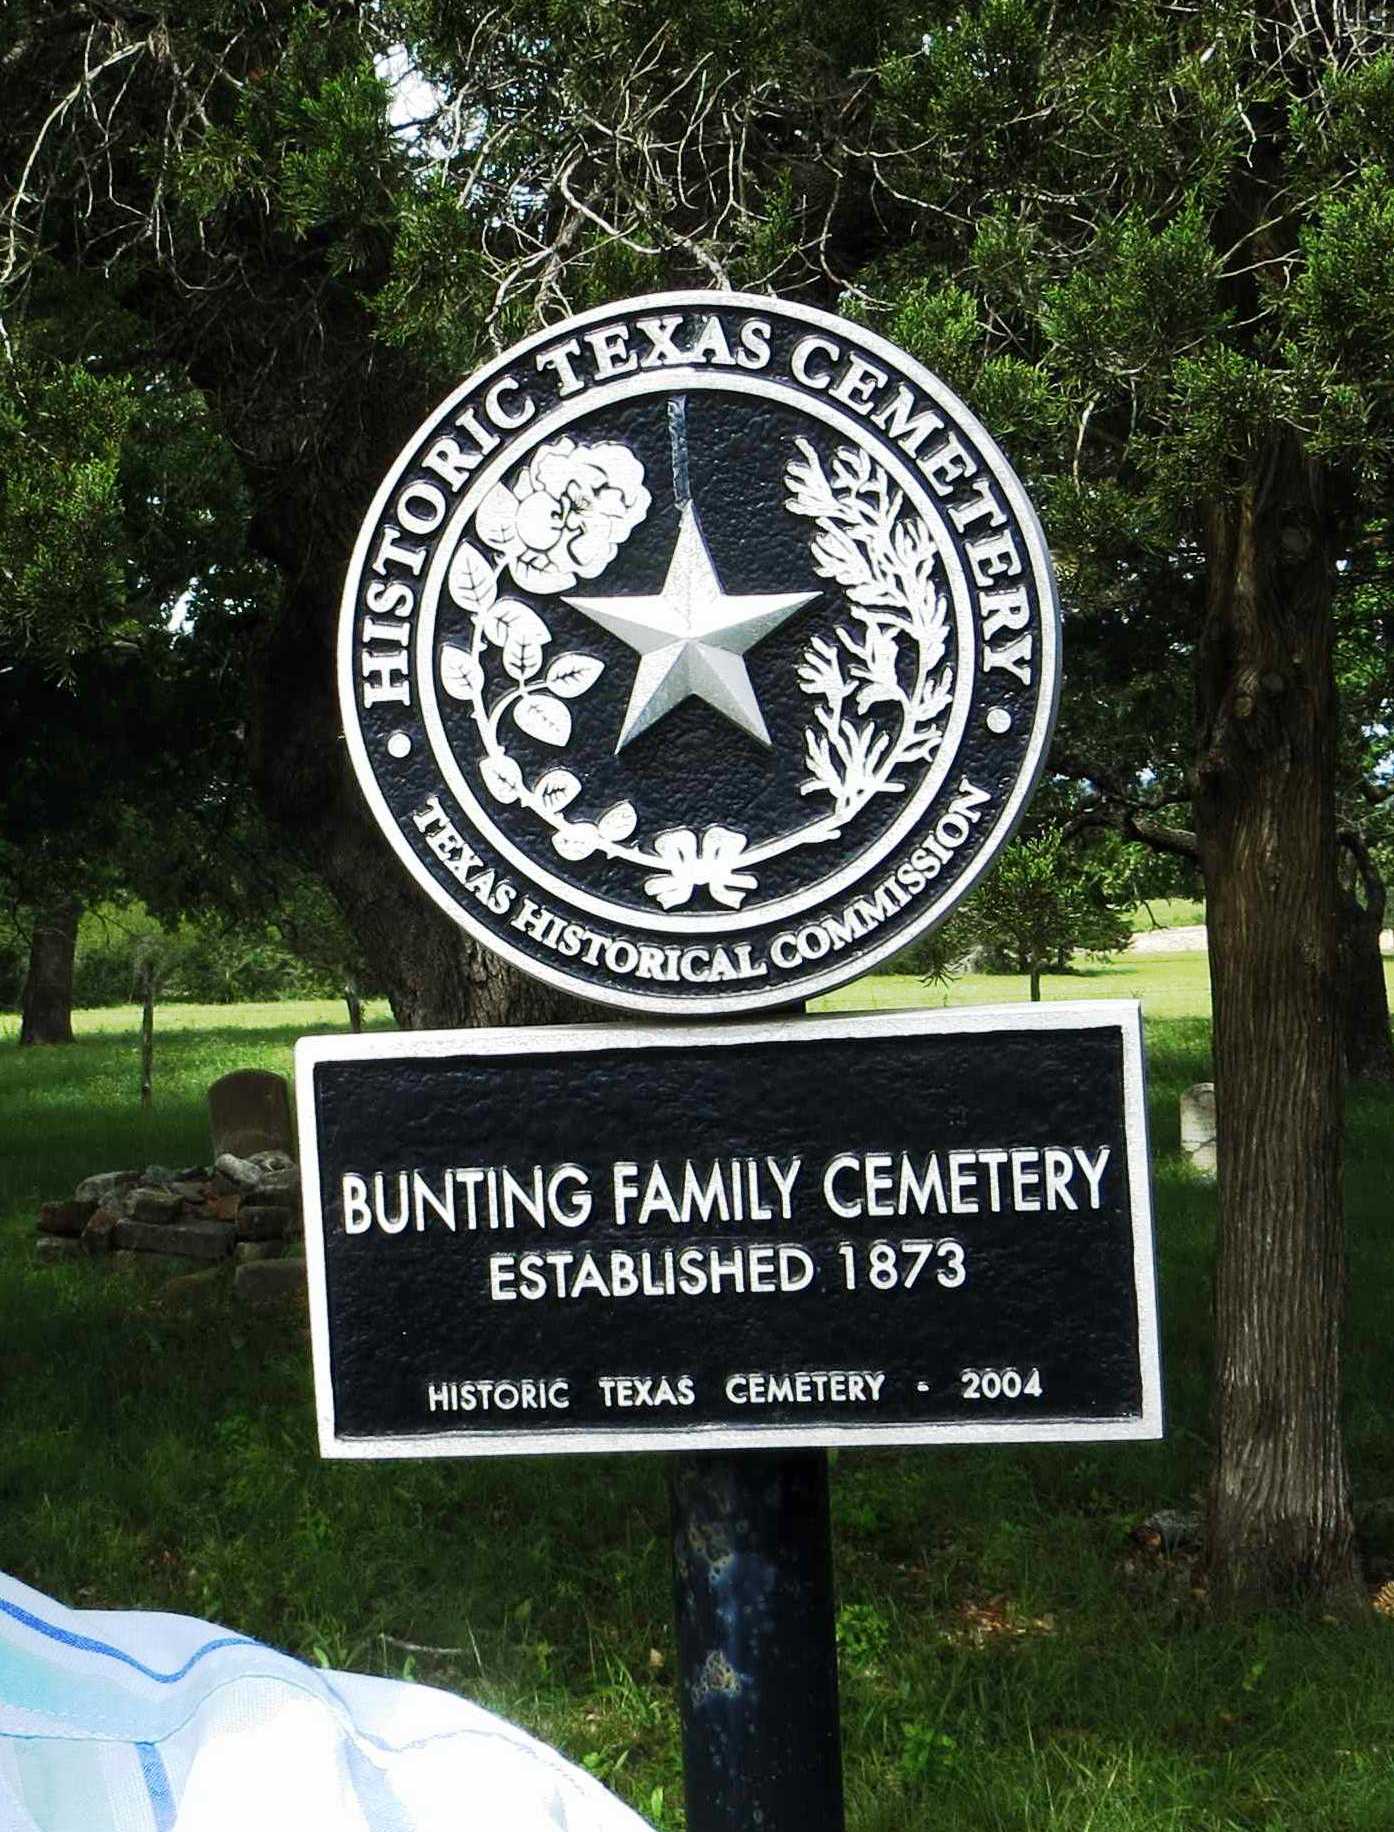 Bunting Family Cemetery